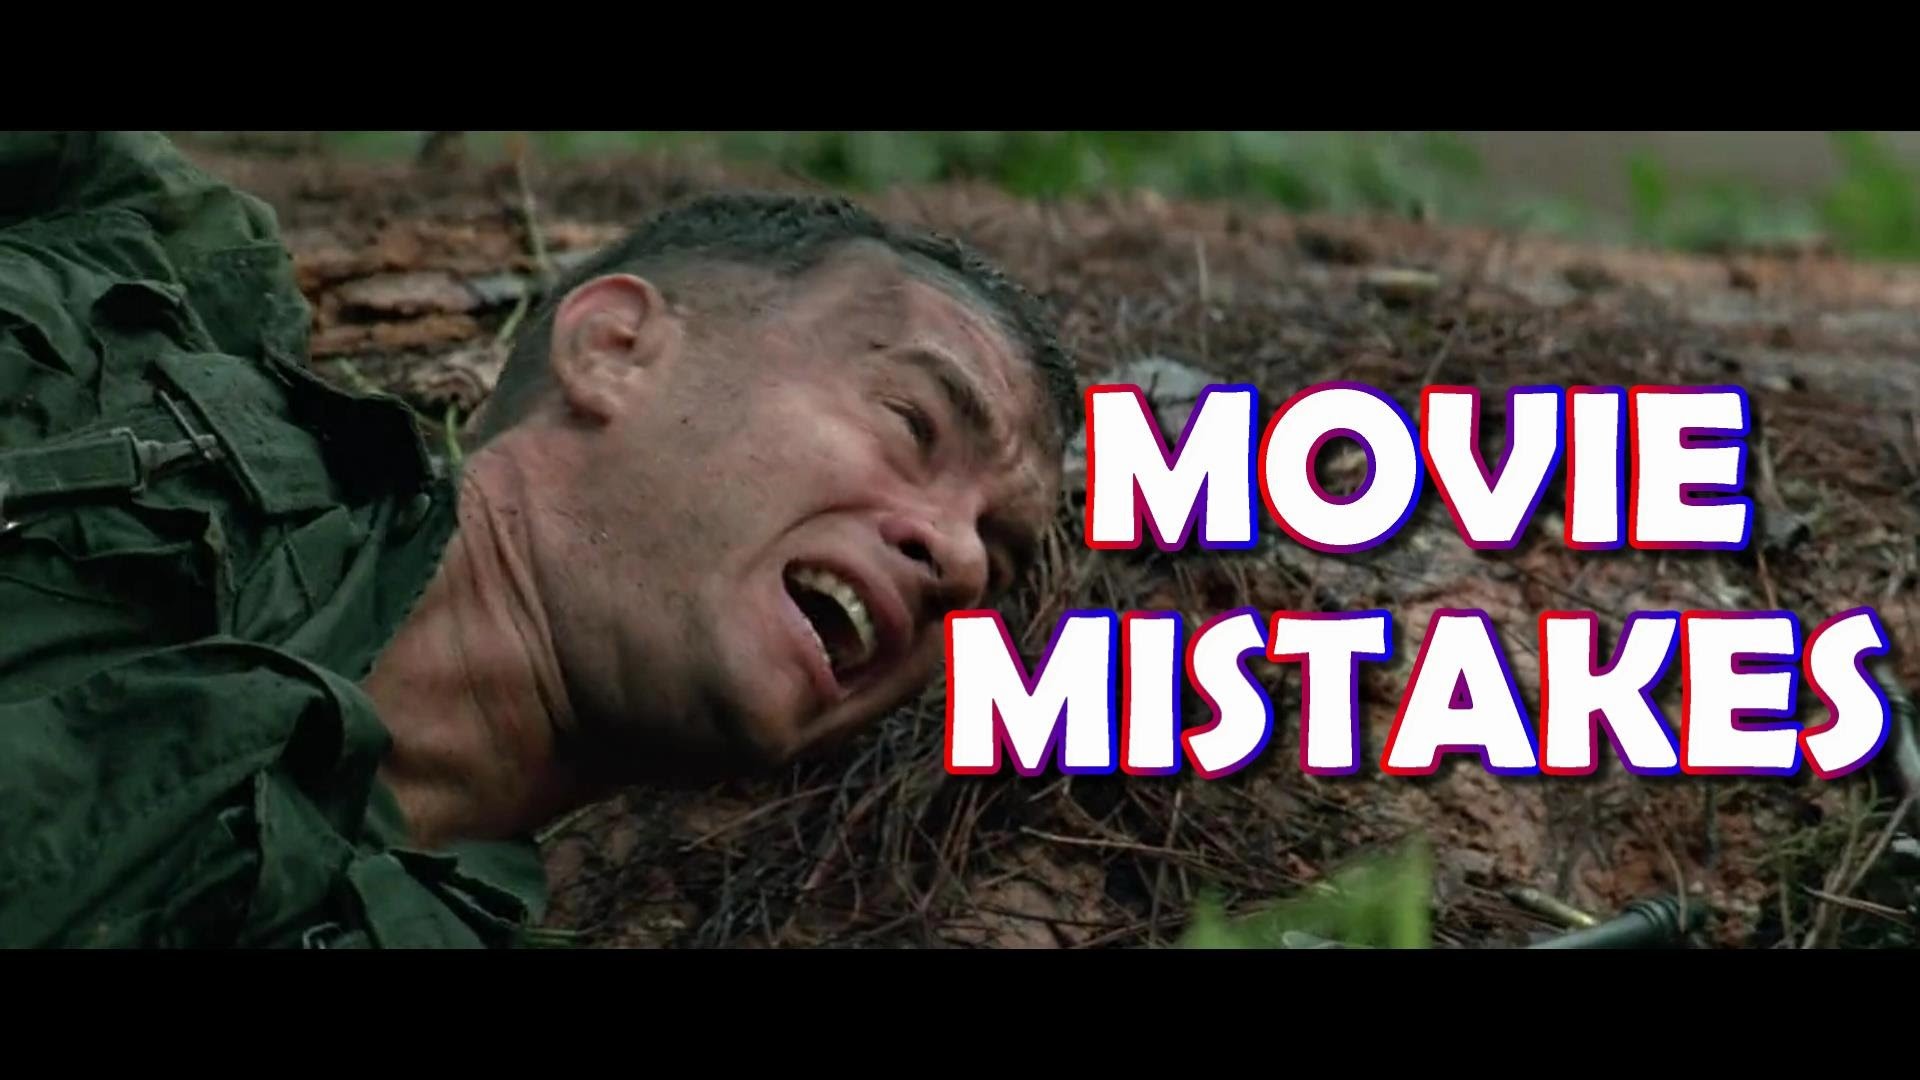 1920x1080 Forrest Gump MOVIE MISTAKES, MOVIE MISTAKES, Facts, Scenes, Bloopers,  Spoilers and Fails - YouTube